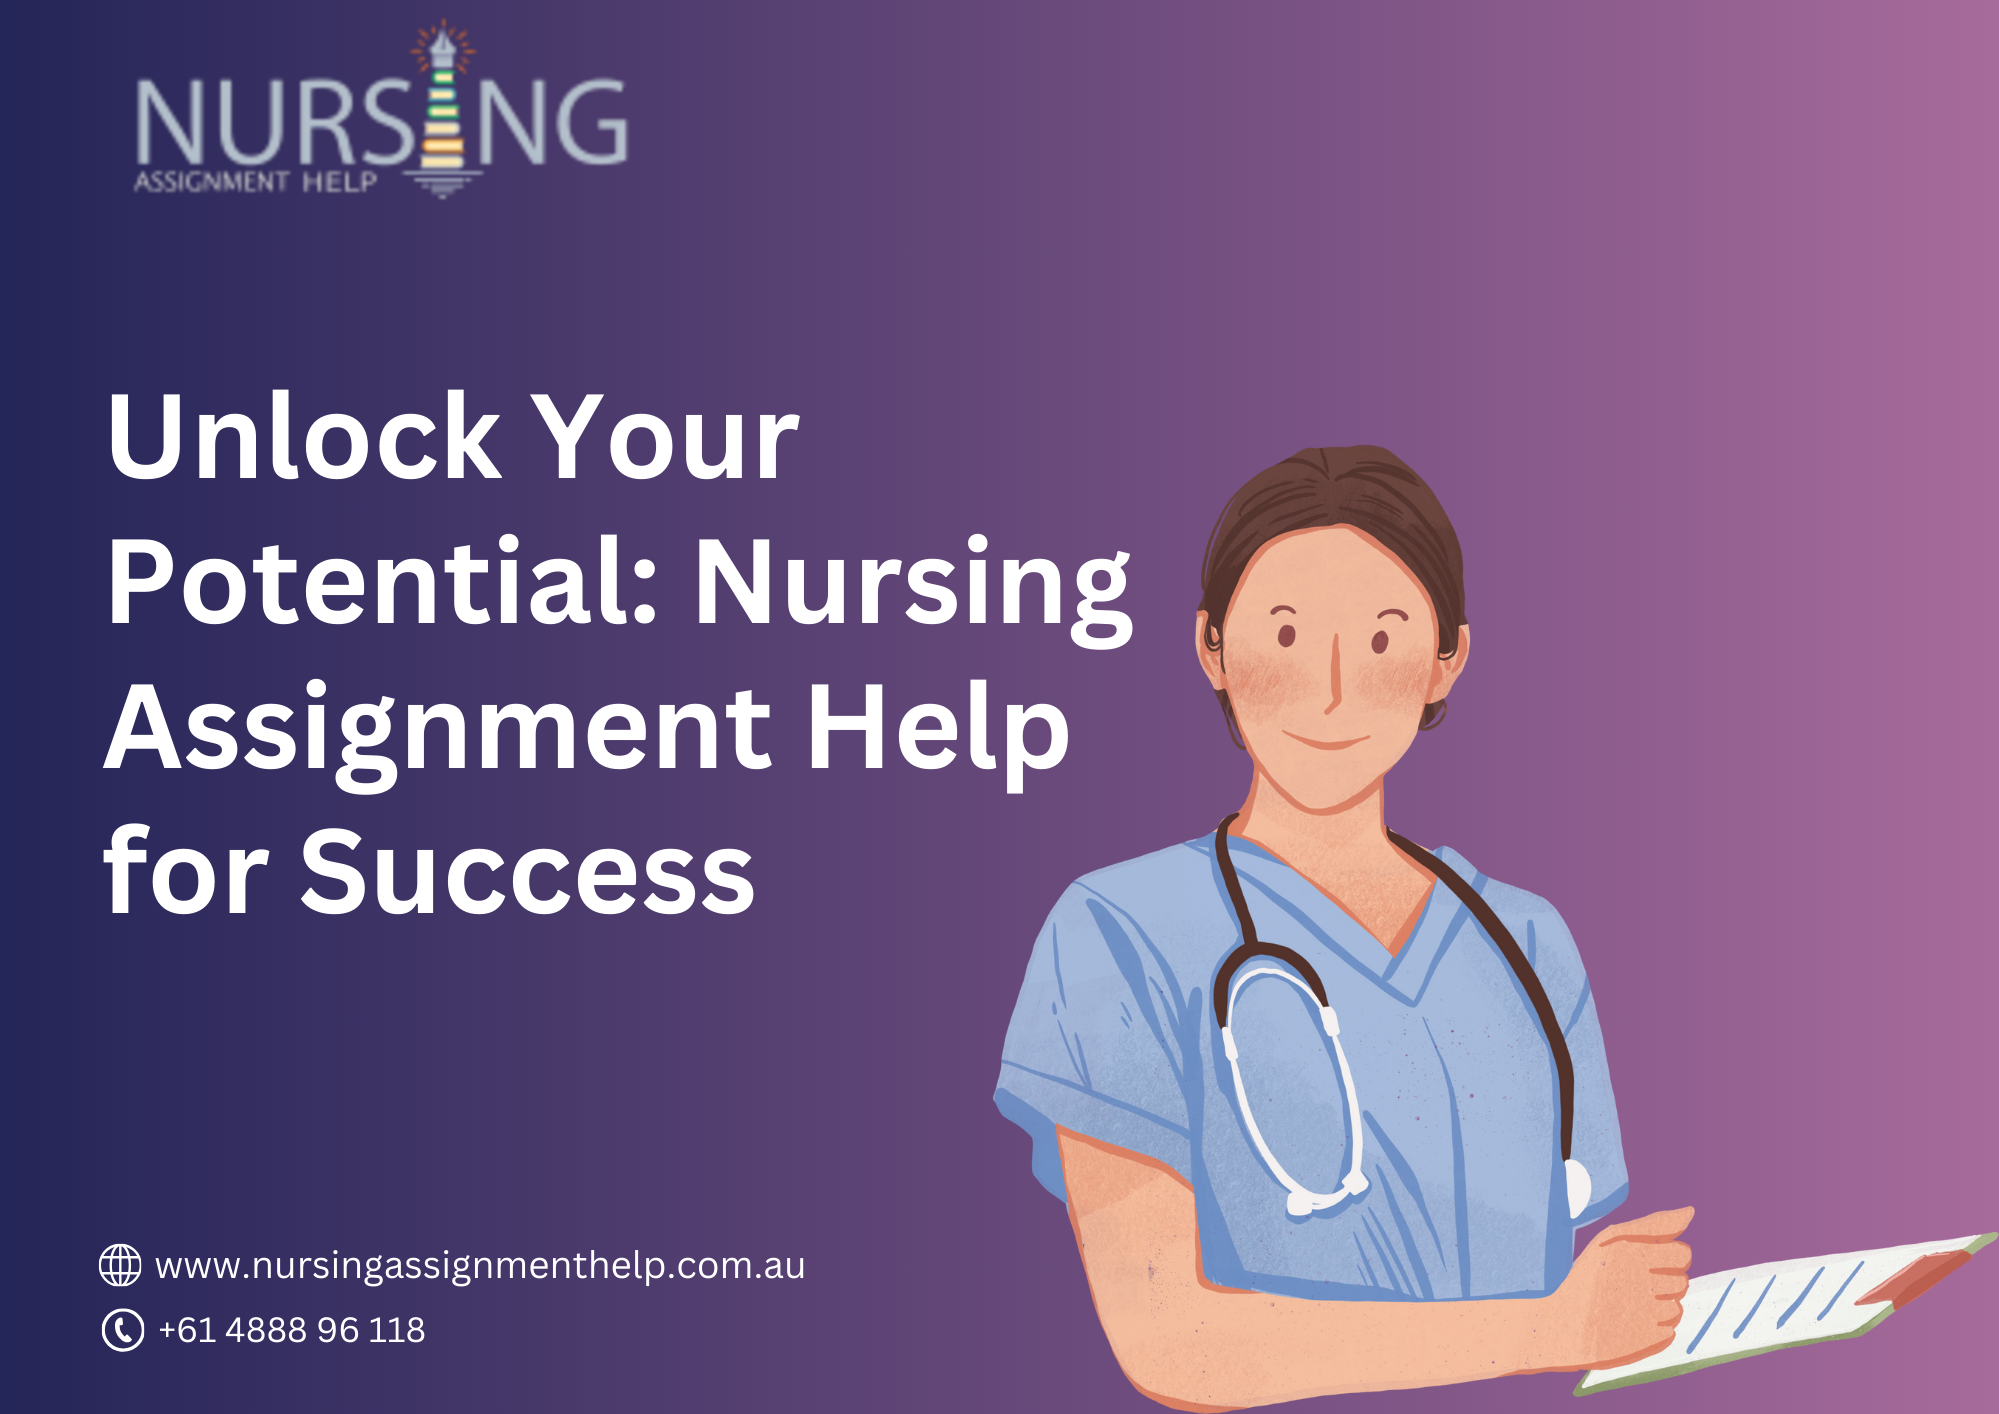 Unlock Your Potential: Nursing Assignment Help for Success